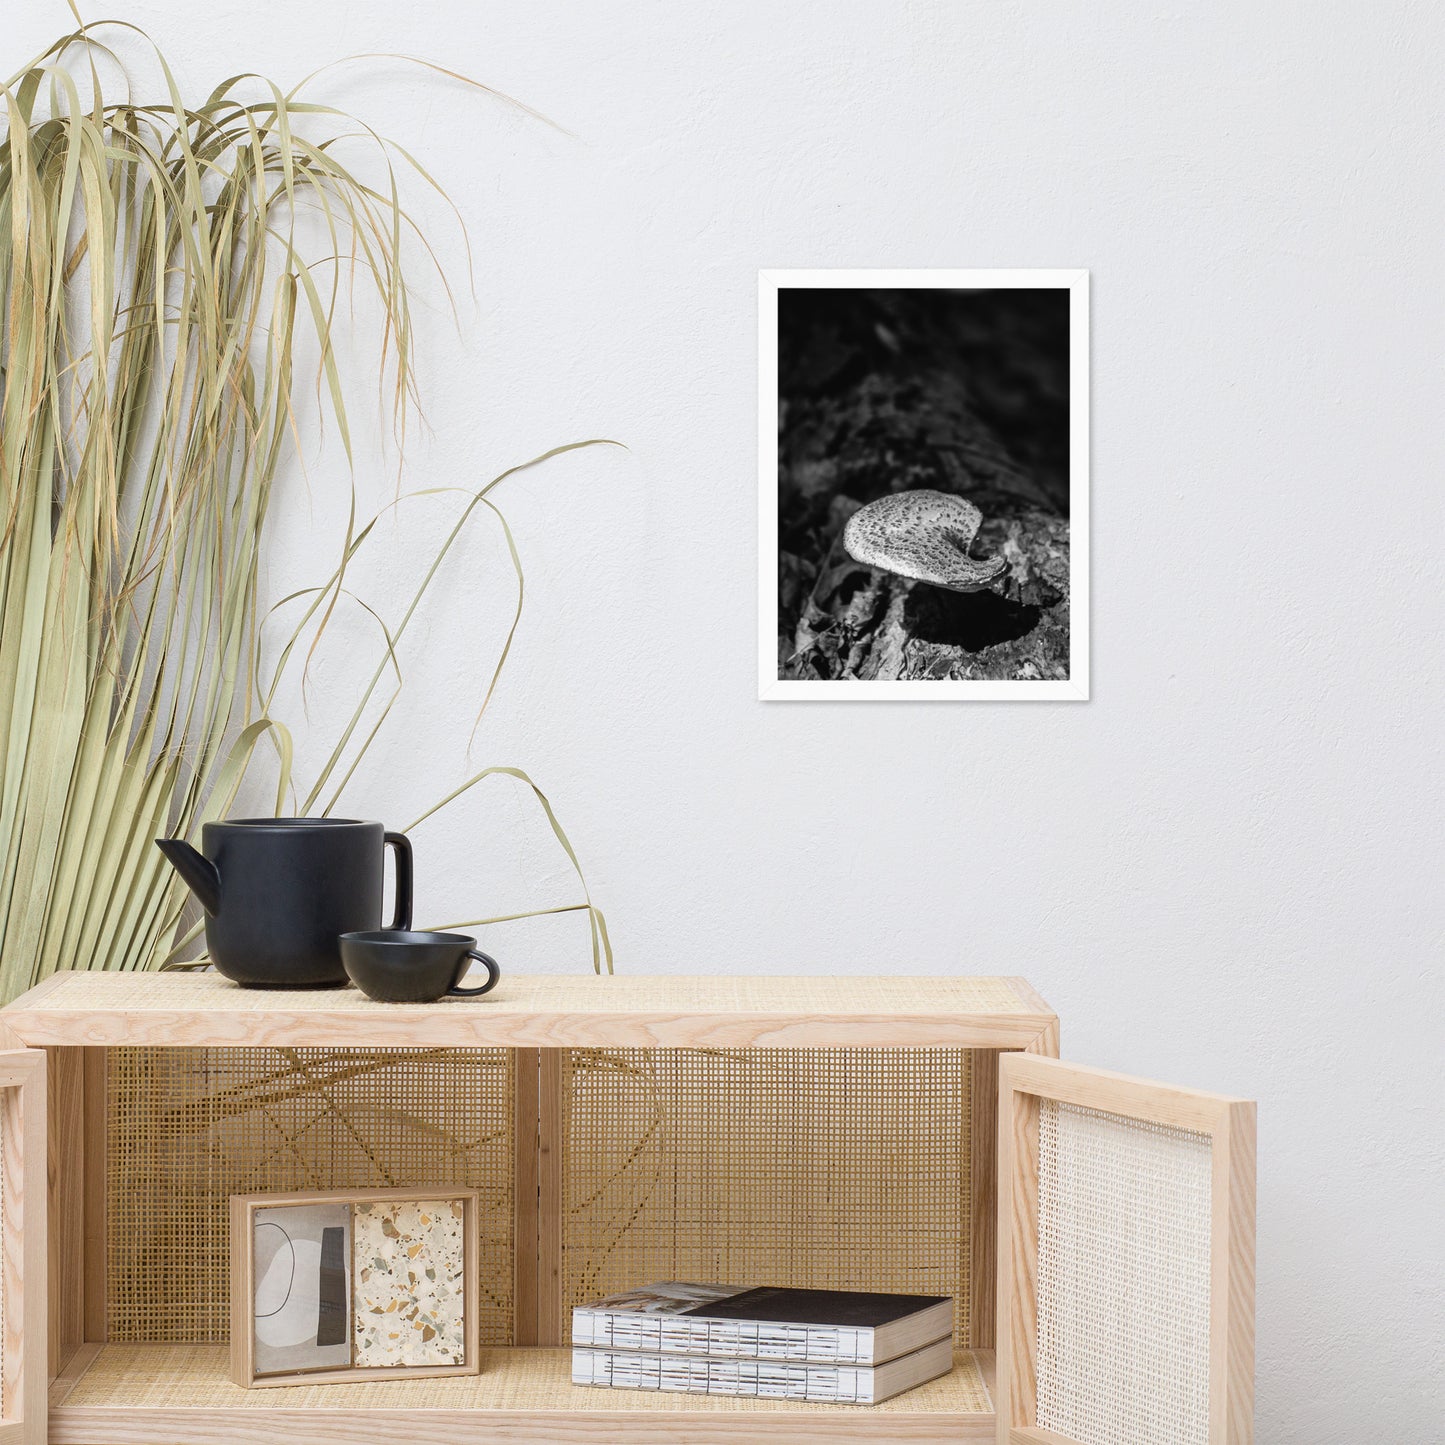 Holistic Wall Art: Mushroom on Log in Black & White Rustic / Country Style Nature Photo Framed Wall Art Print